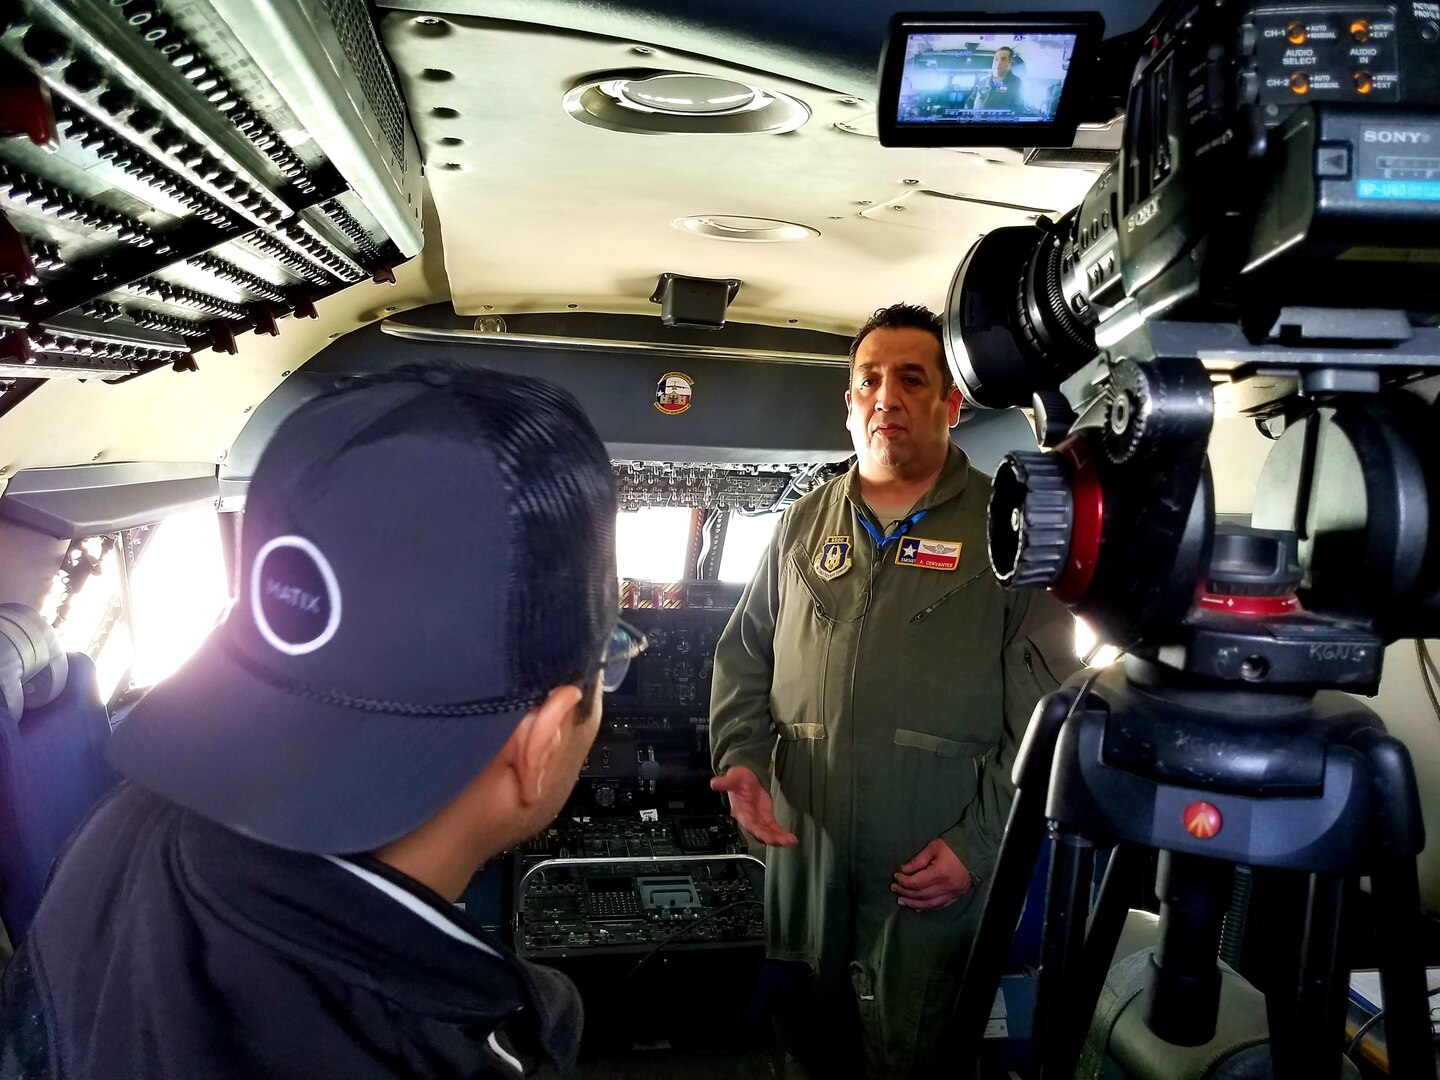 Senior Master Sgt. Alfonso Cervantes, 68th Airlift Squadron loadmaster, speaks with a local television station crew in both English and Spanish while in the cockpit of the 433rd Airlift Wing’s C-5M Super Galaxy from Joint Base San Antonio-Lackland at the Laredo International Airport in Laredo, Texas Feb. 17. Cervantes, a Laredo J.W. Nixon High School graduate, was part of the aircrew that flew the aircraft to the Washington’s Birthday Celebration Association Stars and Stripes Air Show Spectacular.